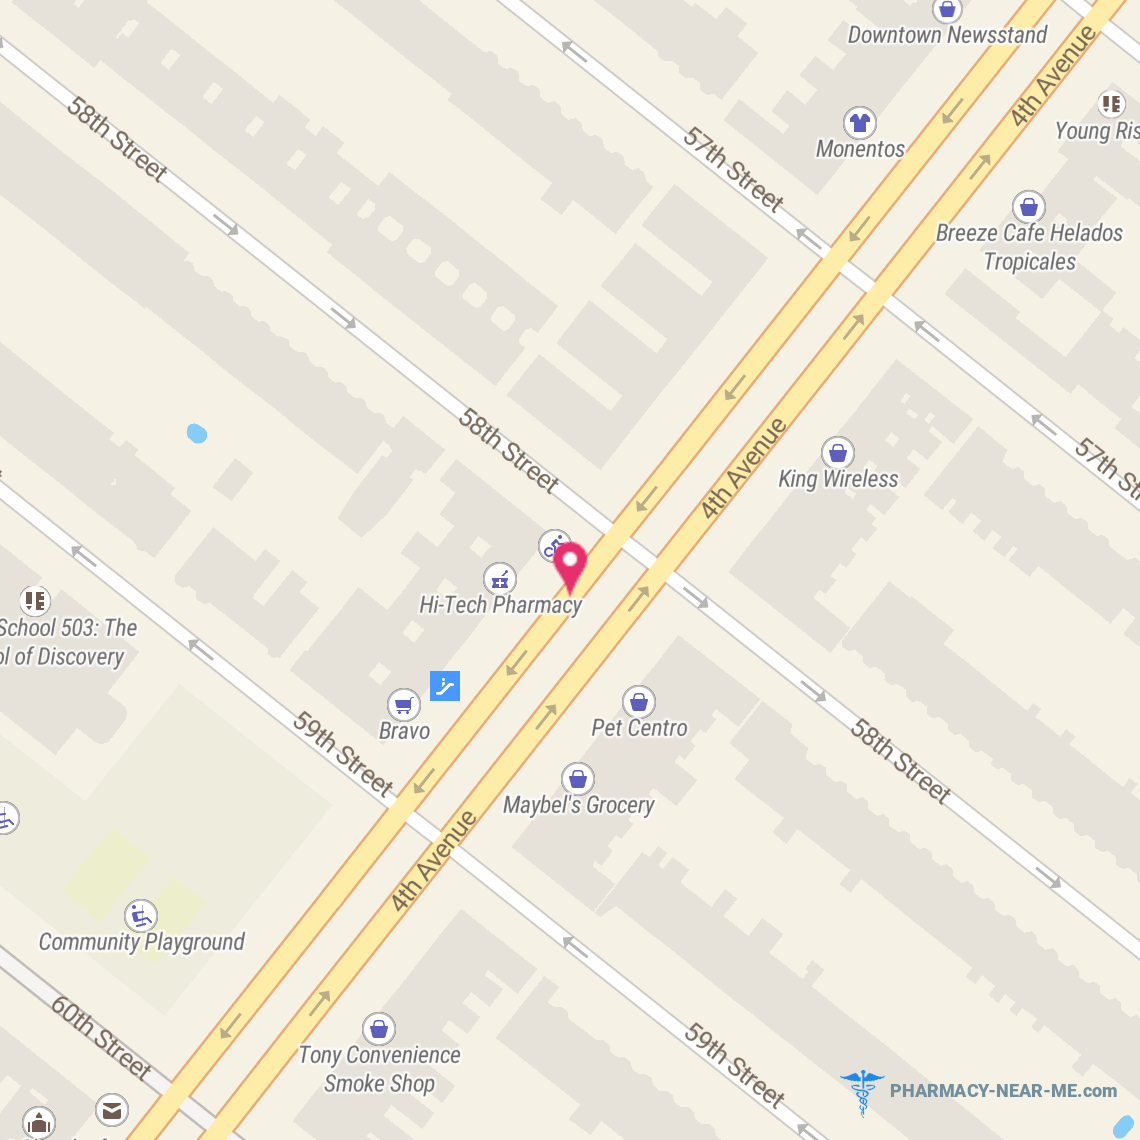 59 STREET RX INC - Pharmacy Hours, Phone, Reviews & Information: 5816 4th Avenue, Brooklyn, New York 11220, United States